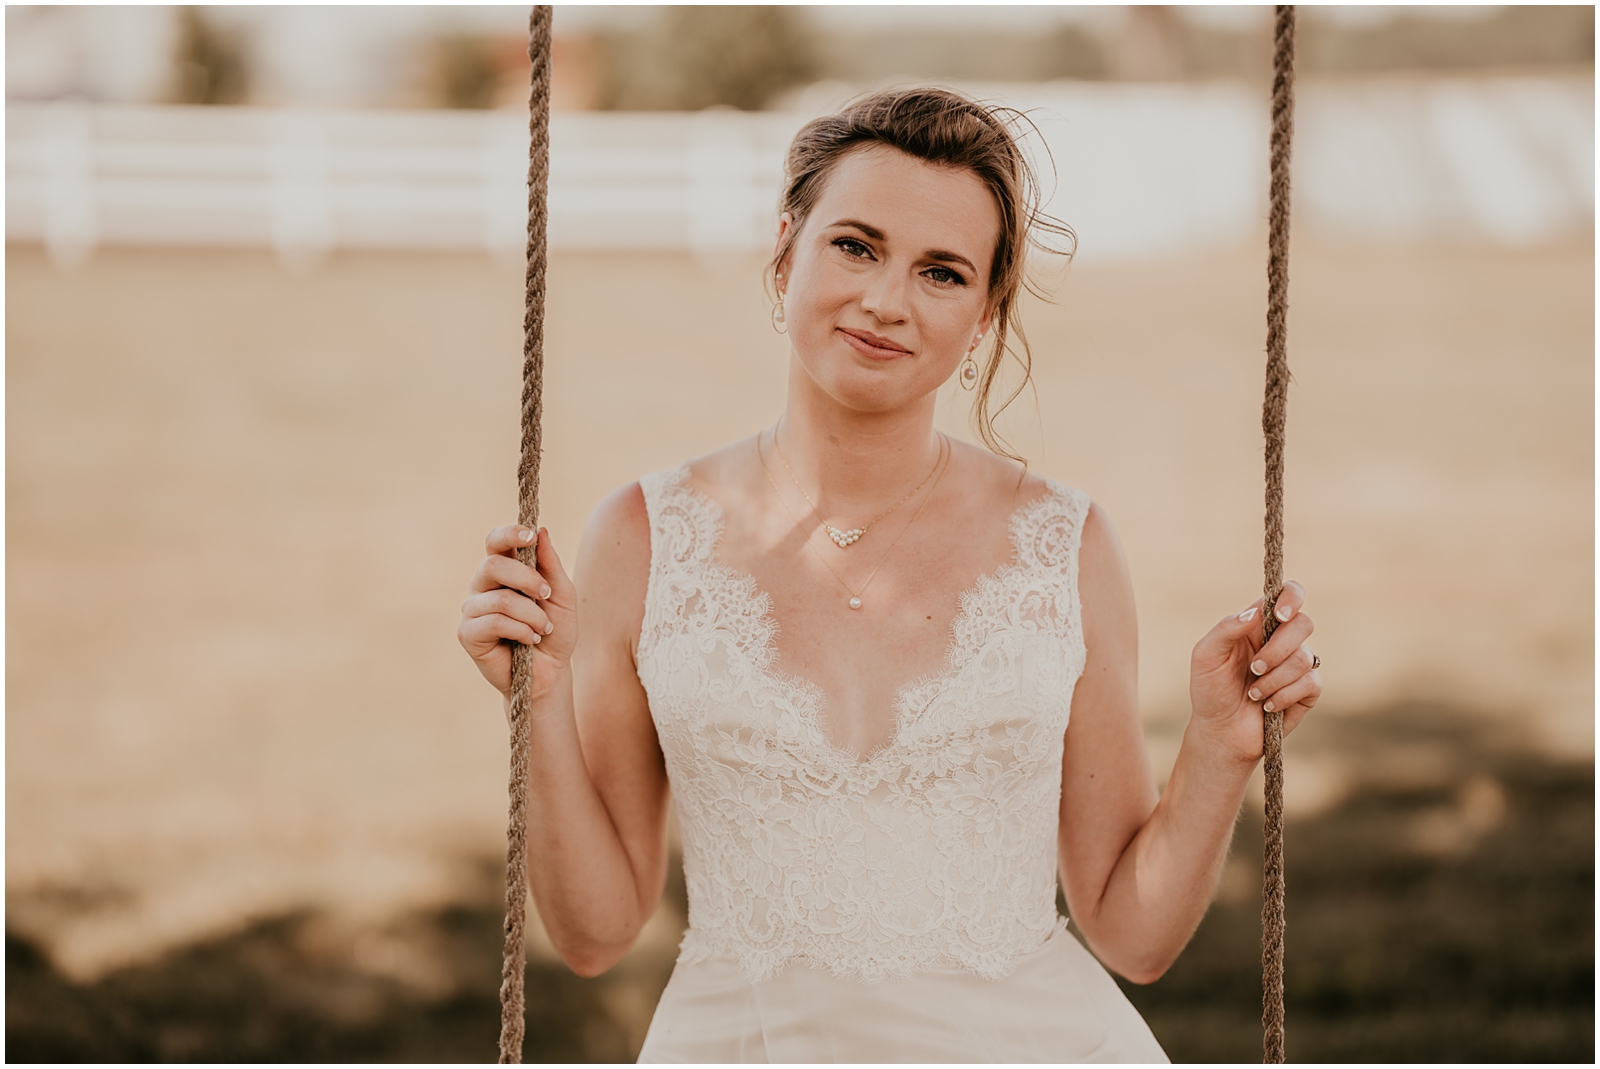 Bride and groom photos on swing